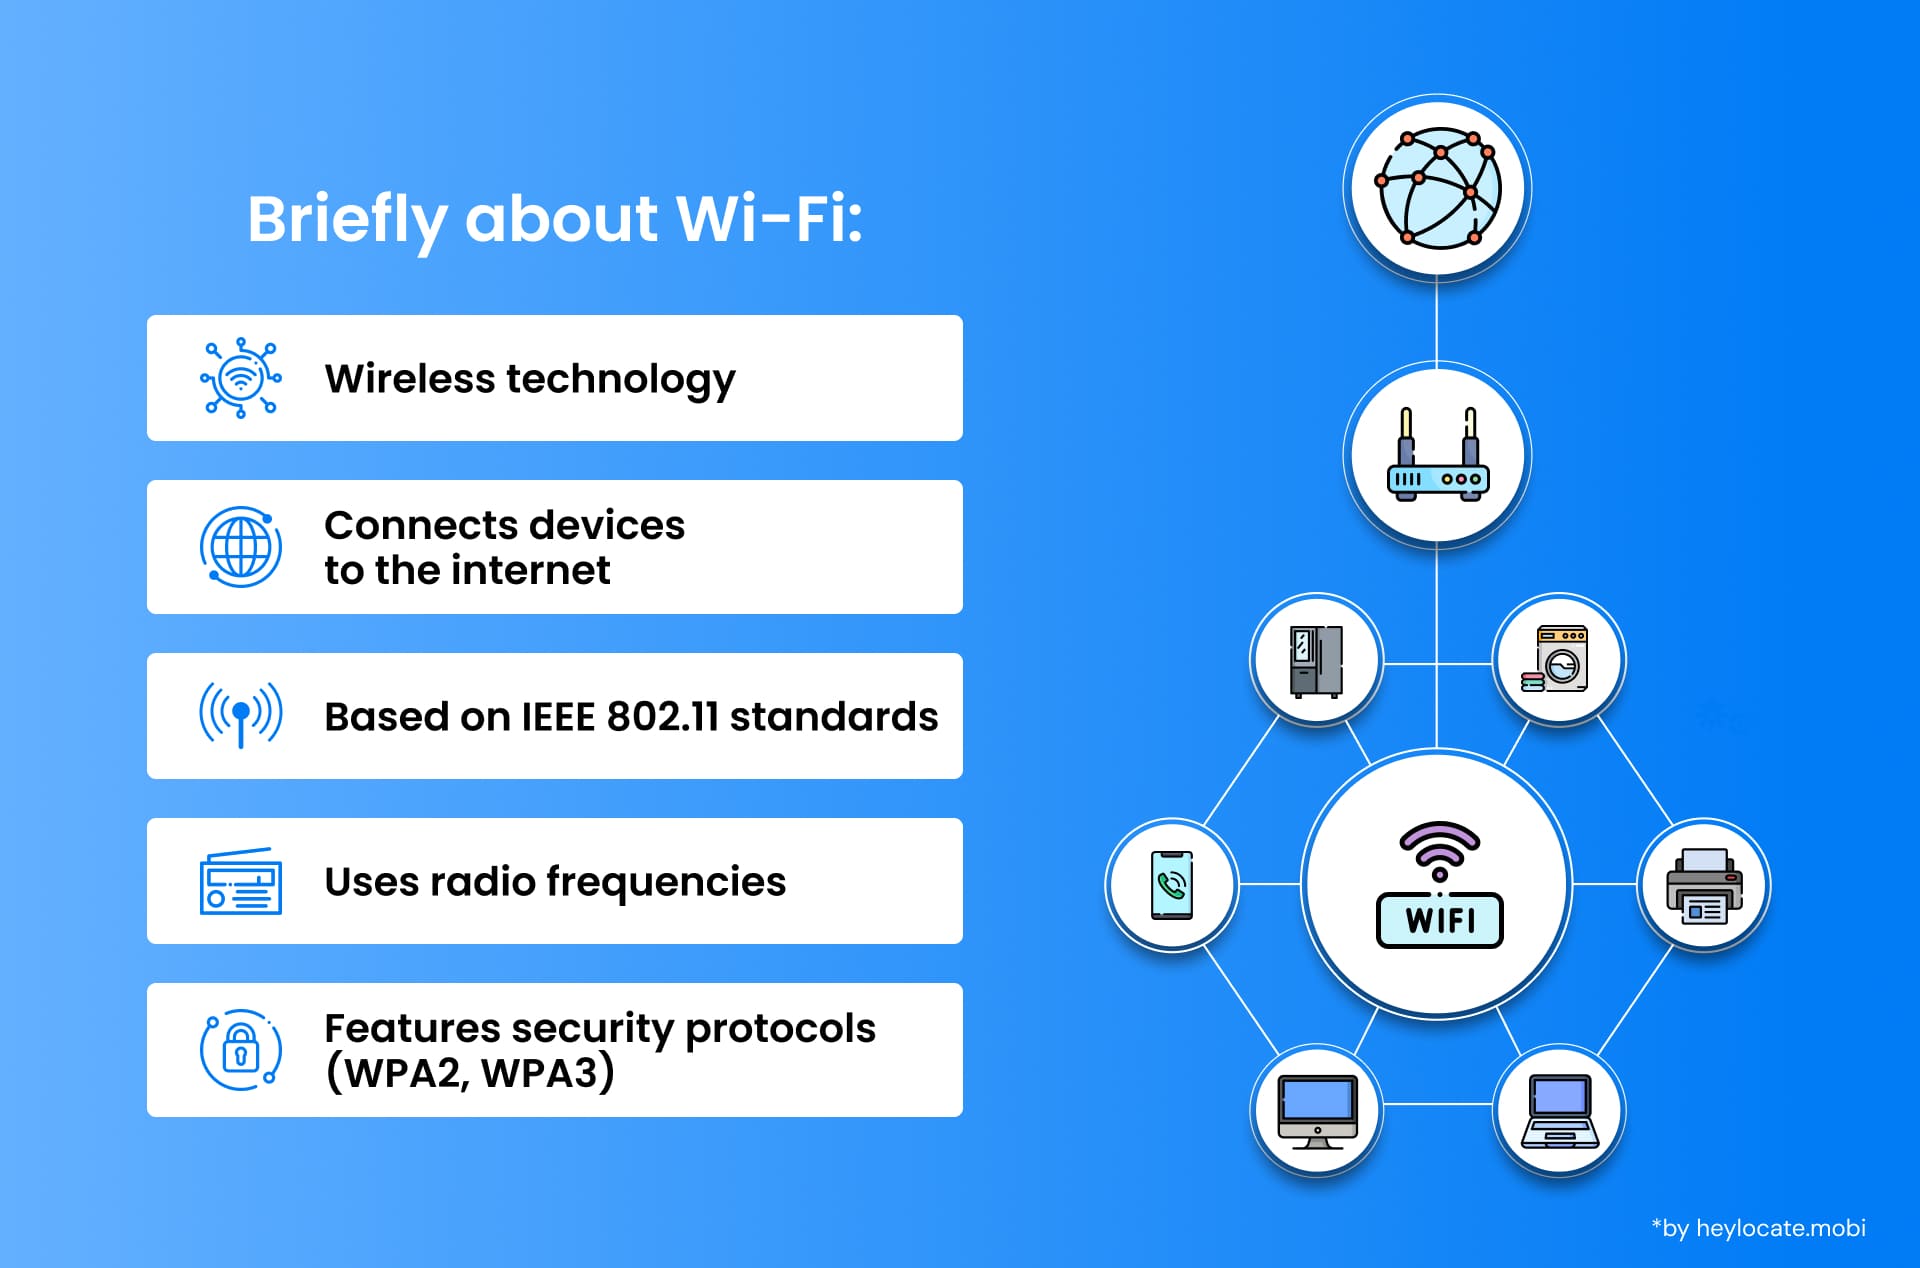 An infographic explaining Wi-Fi technology, including its connection to devices, standards, frequency usage, and security protocols